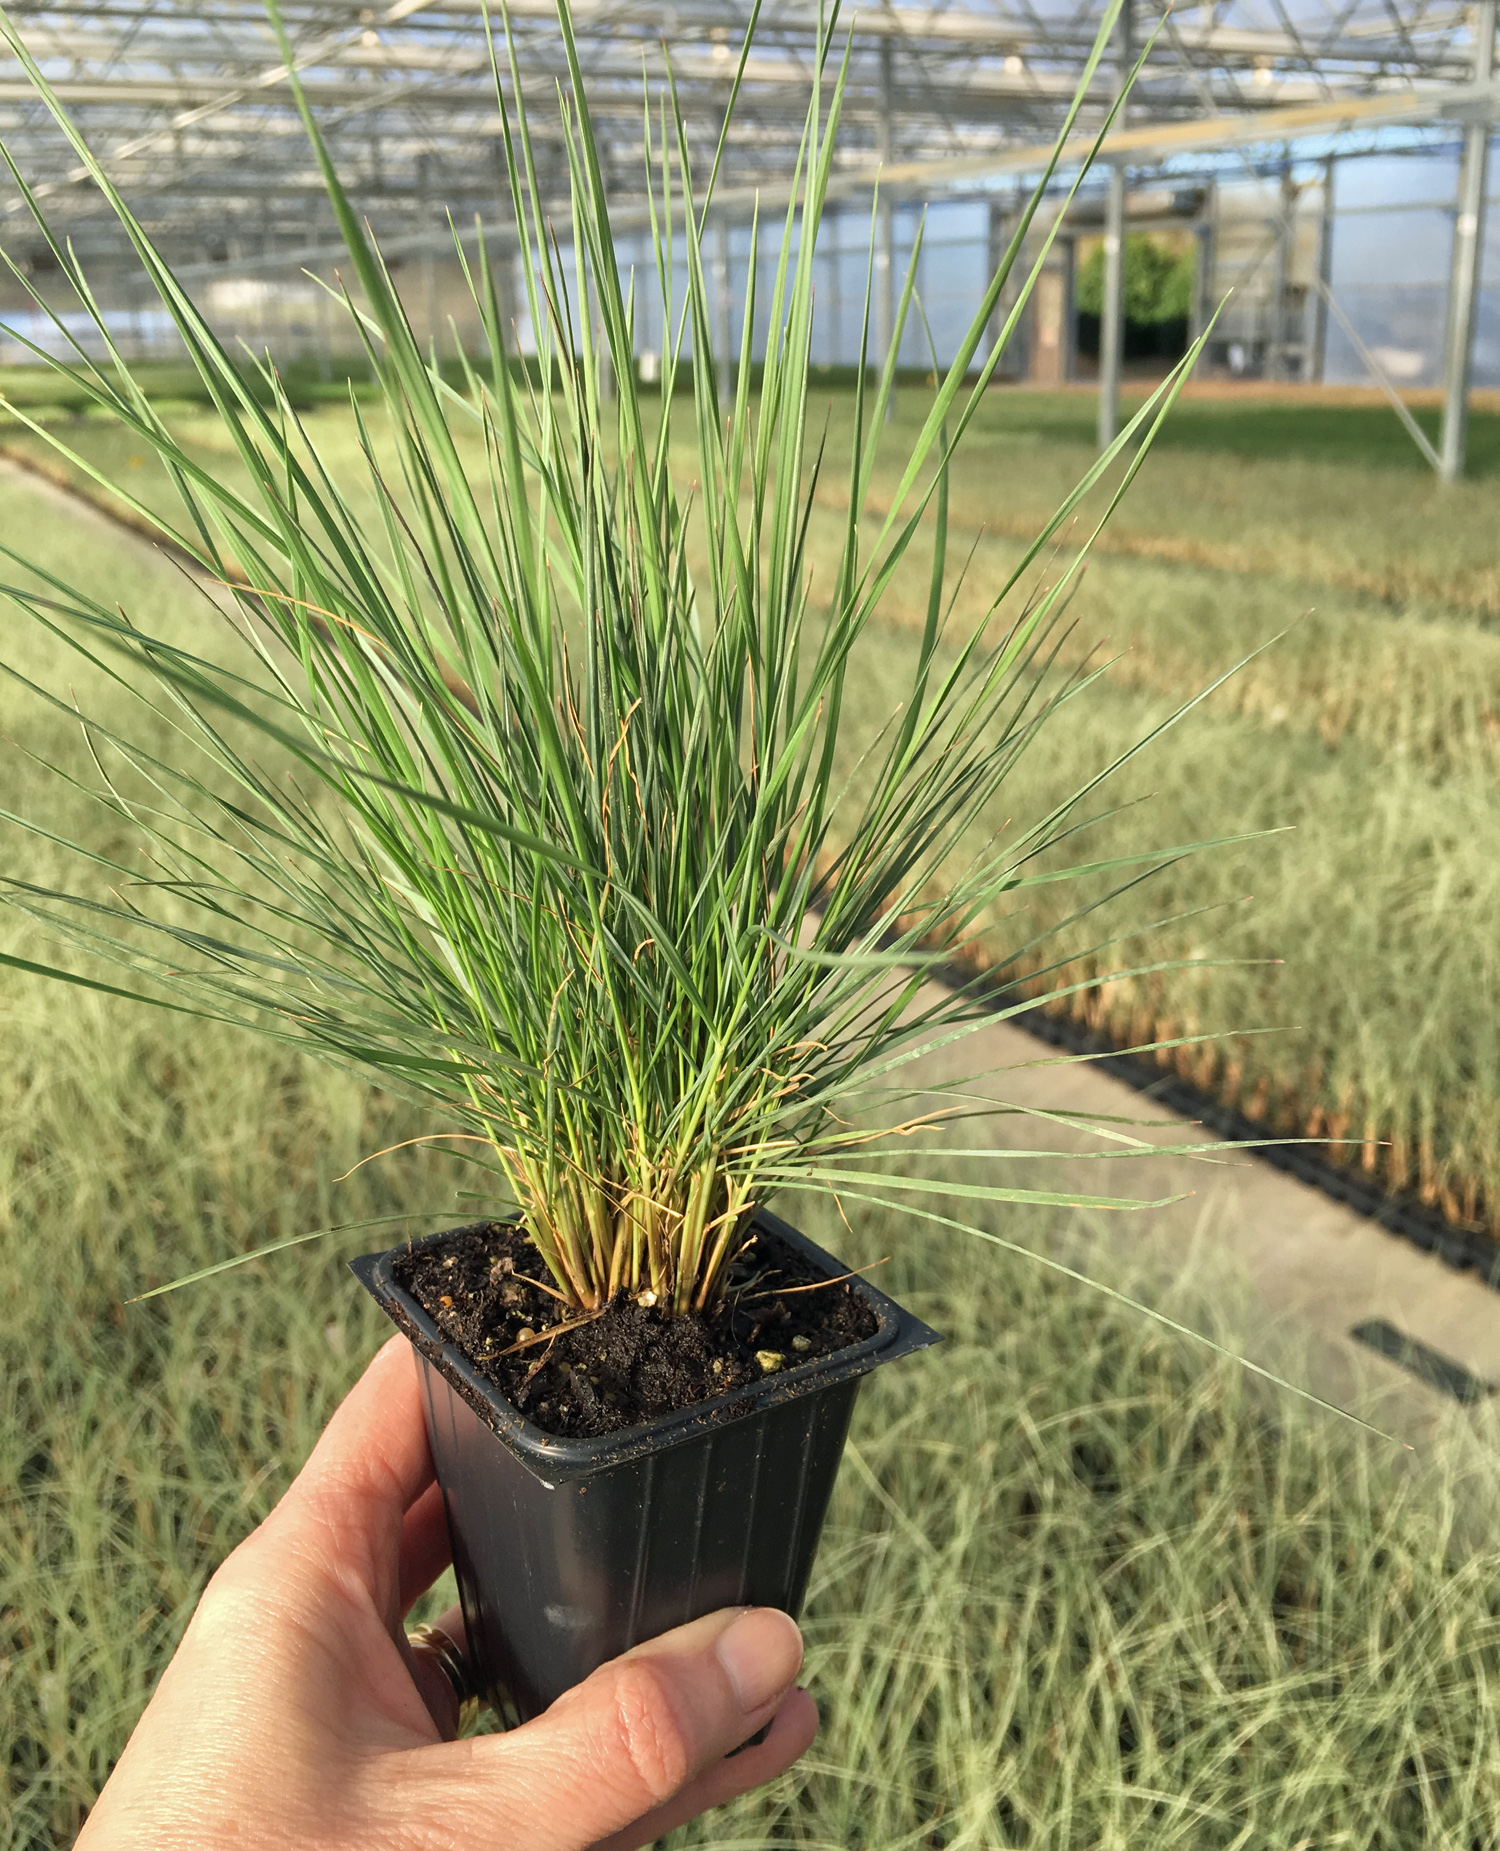 Dig deeper into Muhly Grasses, the genus Muhlenbergia.